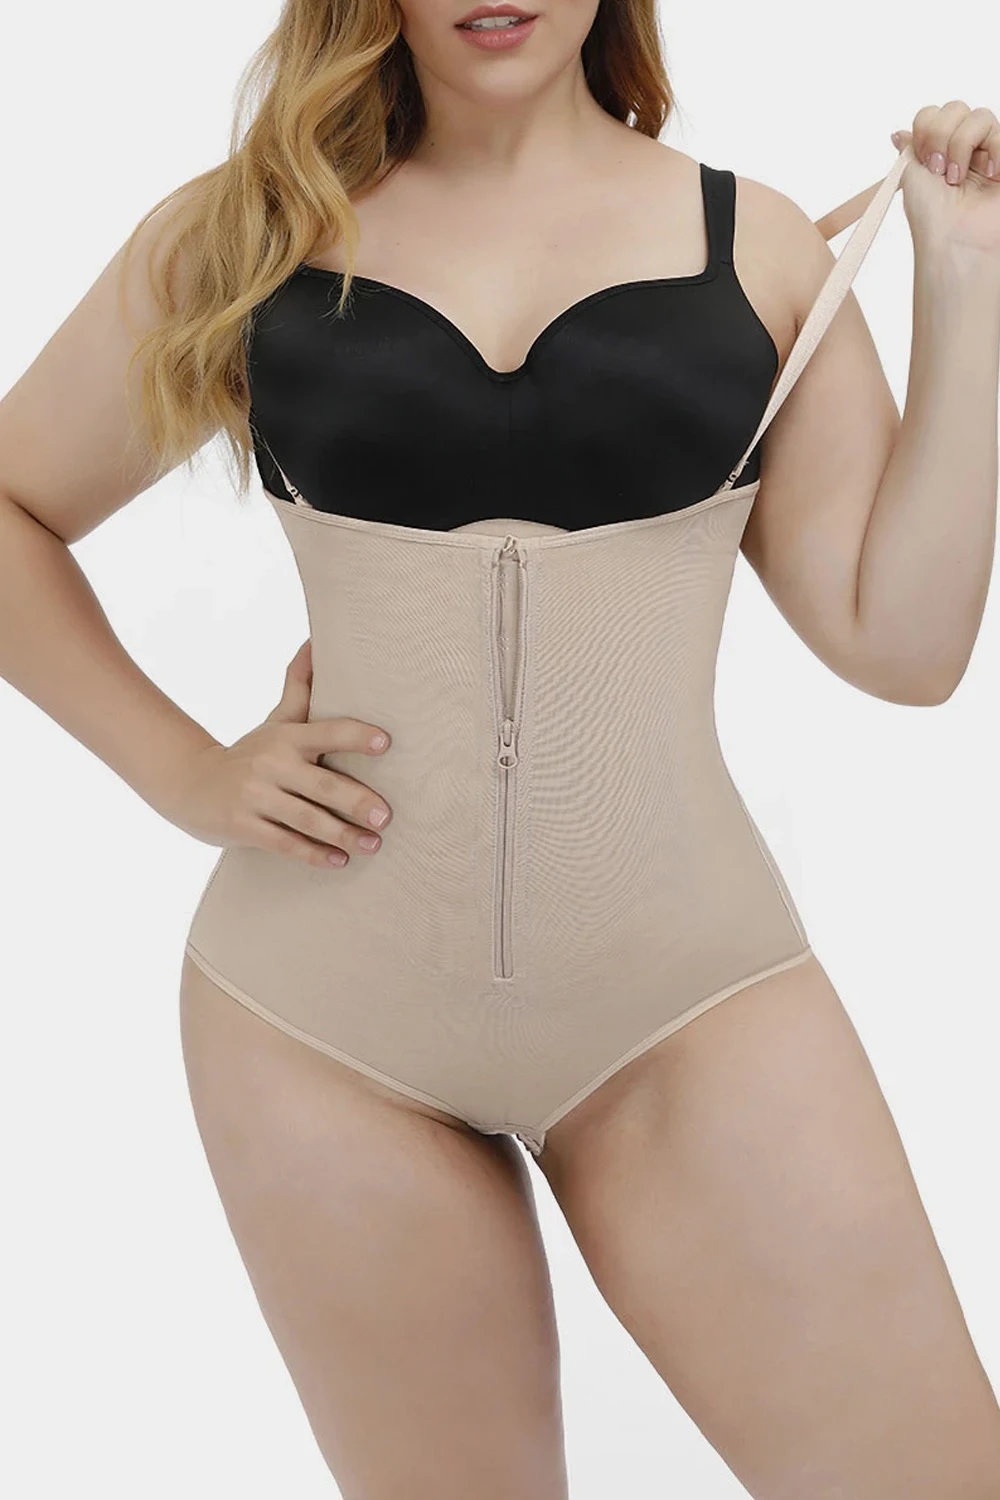 Shapewear Secrets Revealed: How Does It Actually Work?